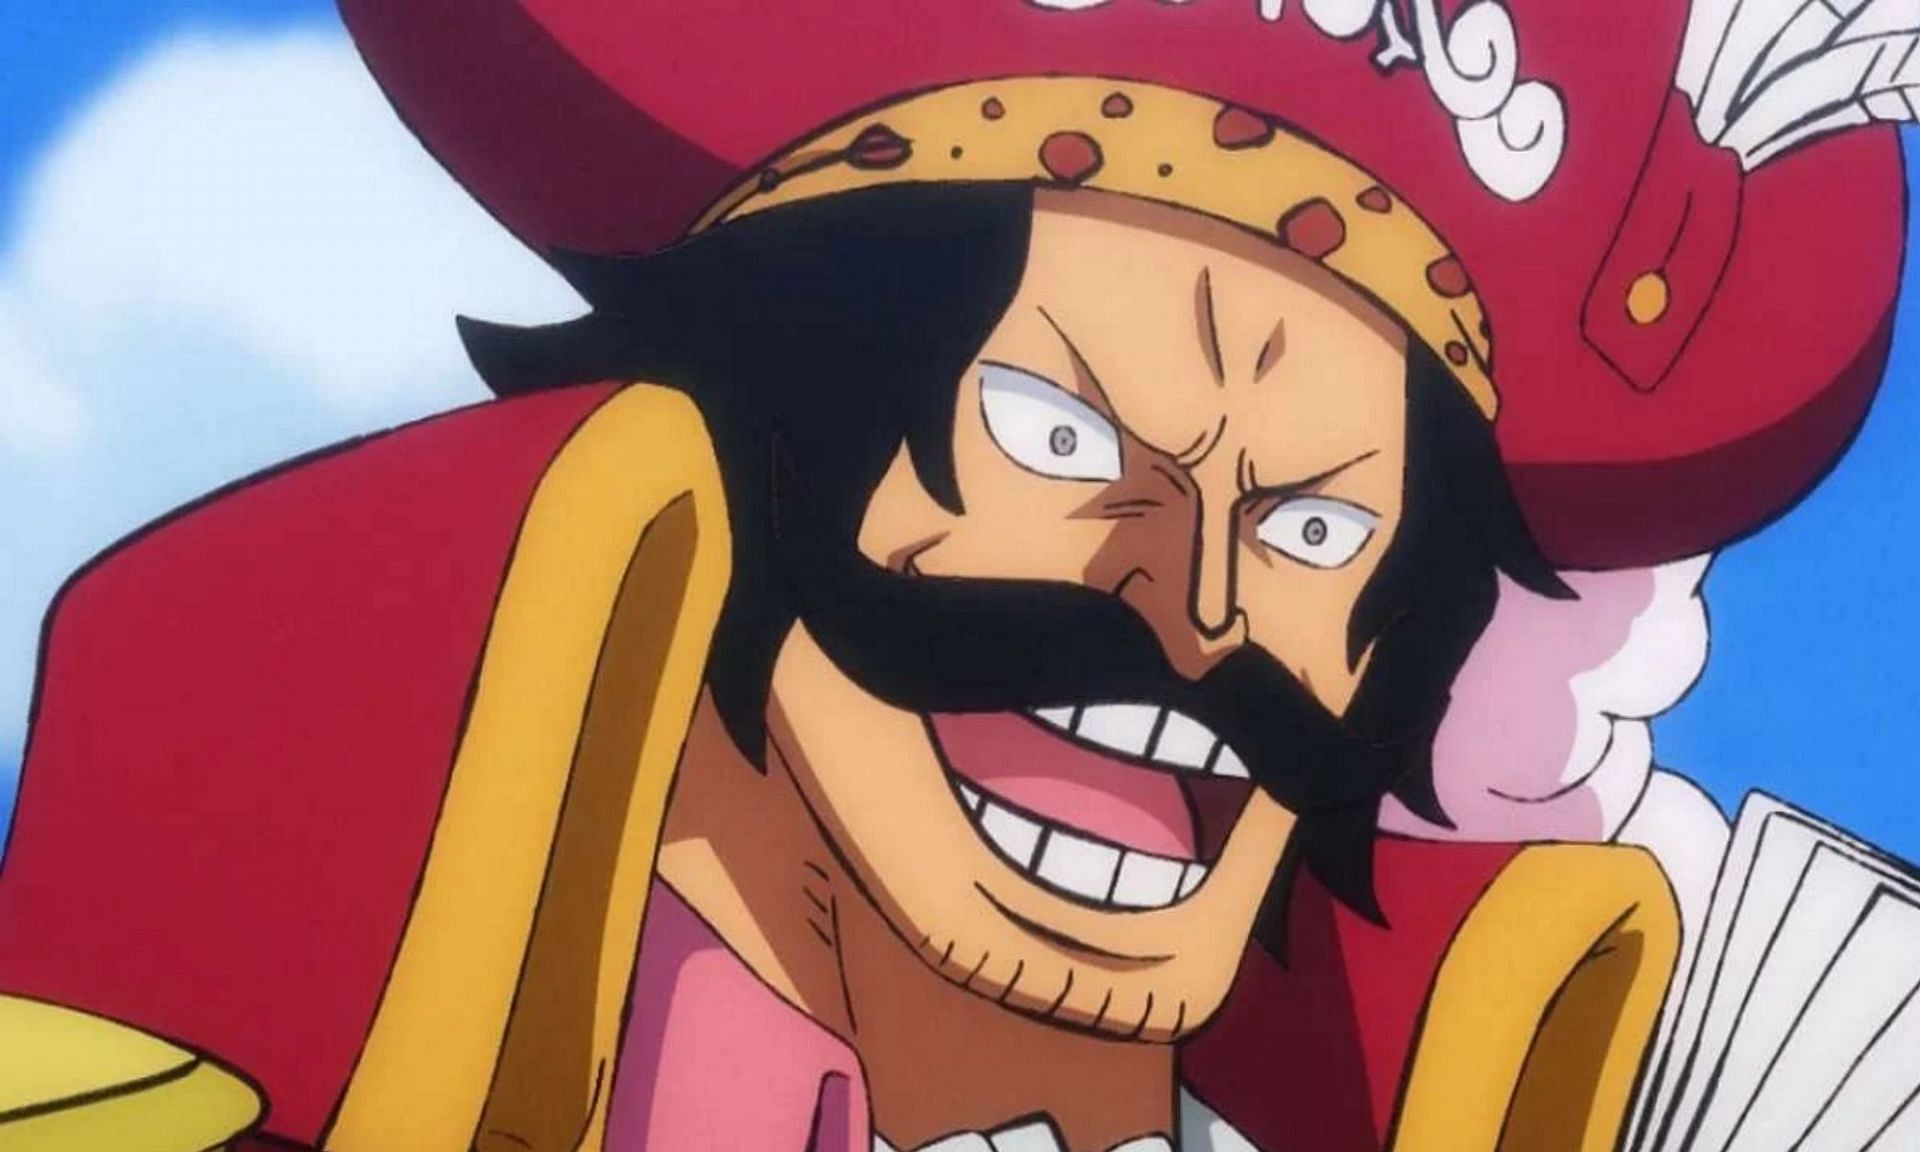 The Pirate King sent massive shock waves with his death